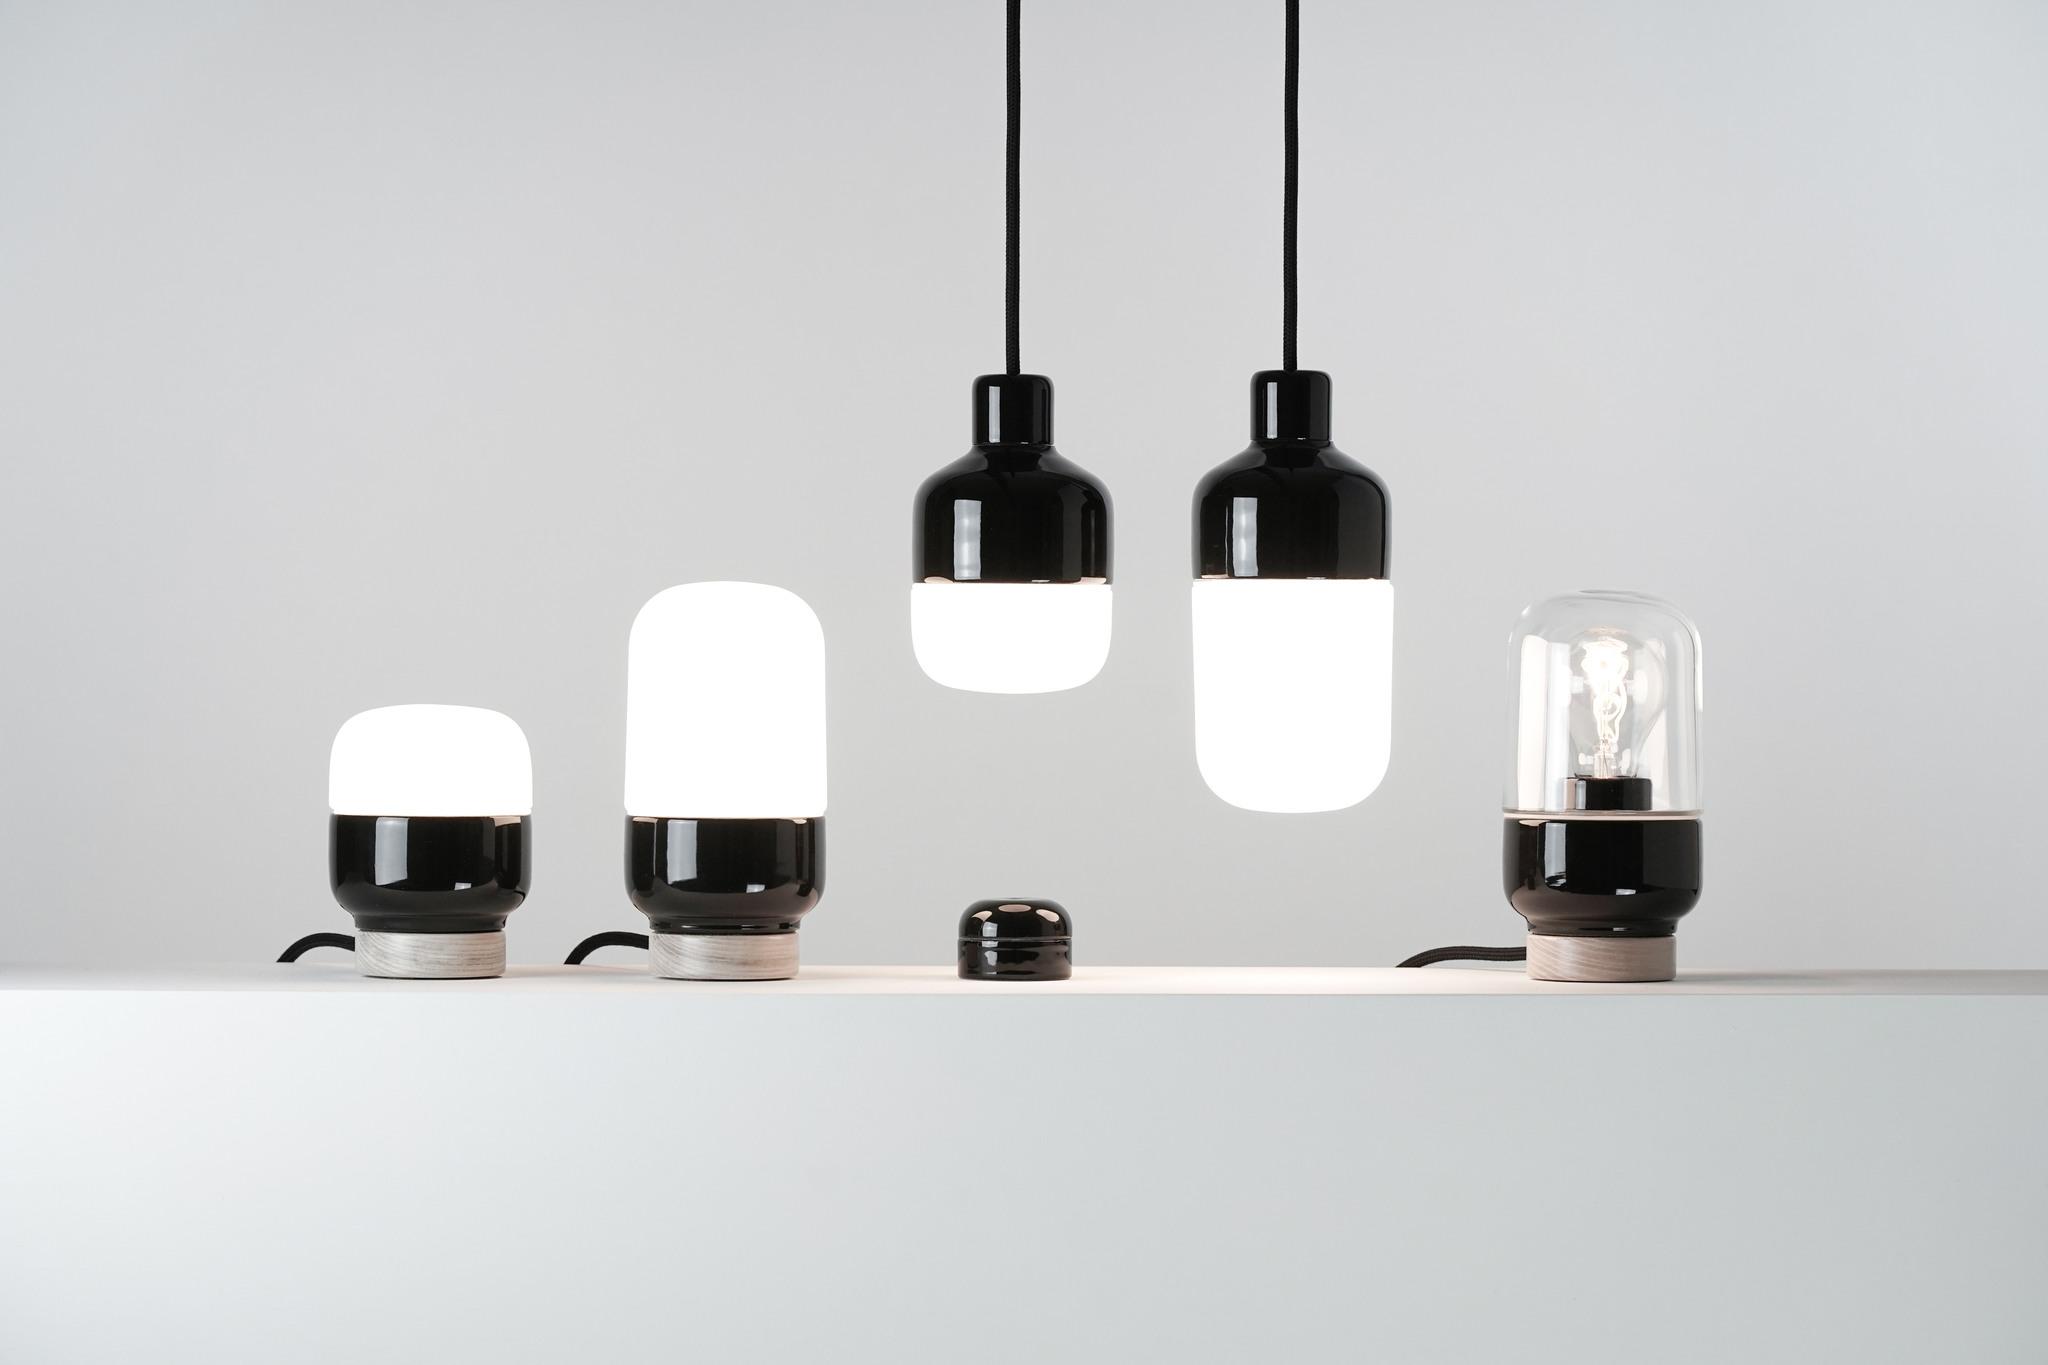 A collection of lamps with a simple black porcelain design.